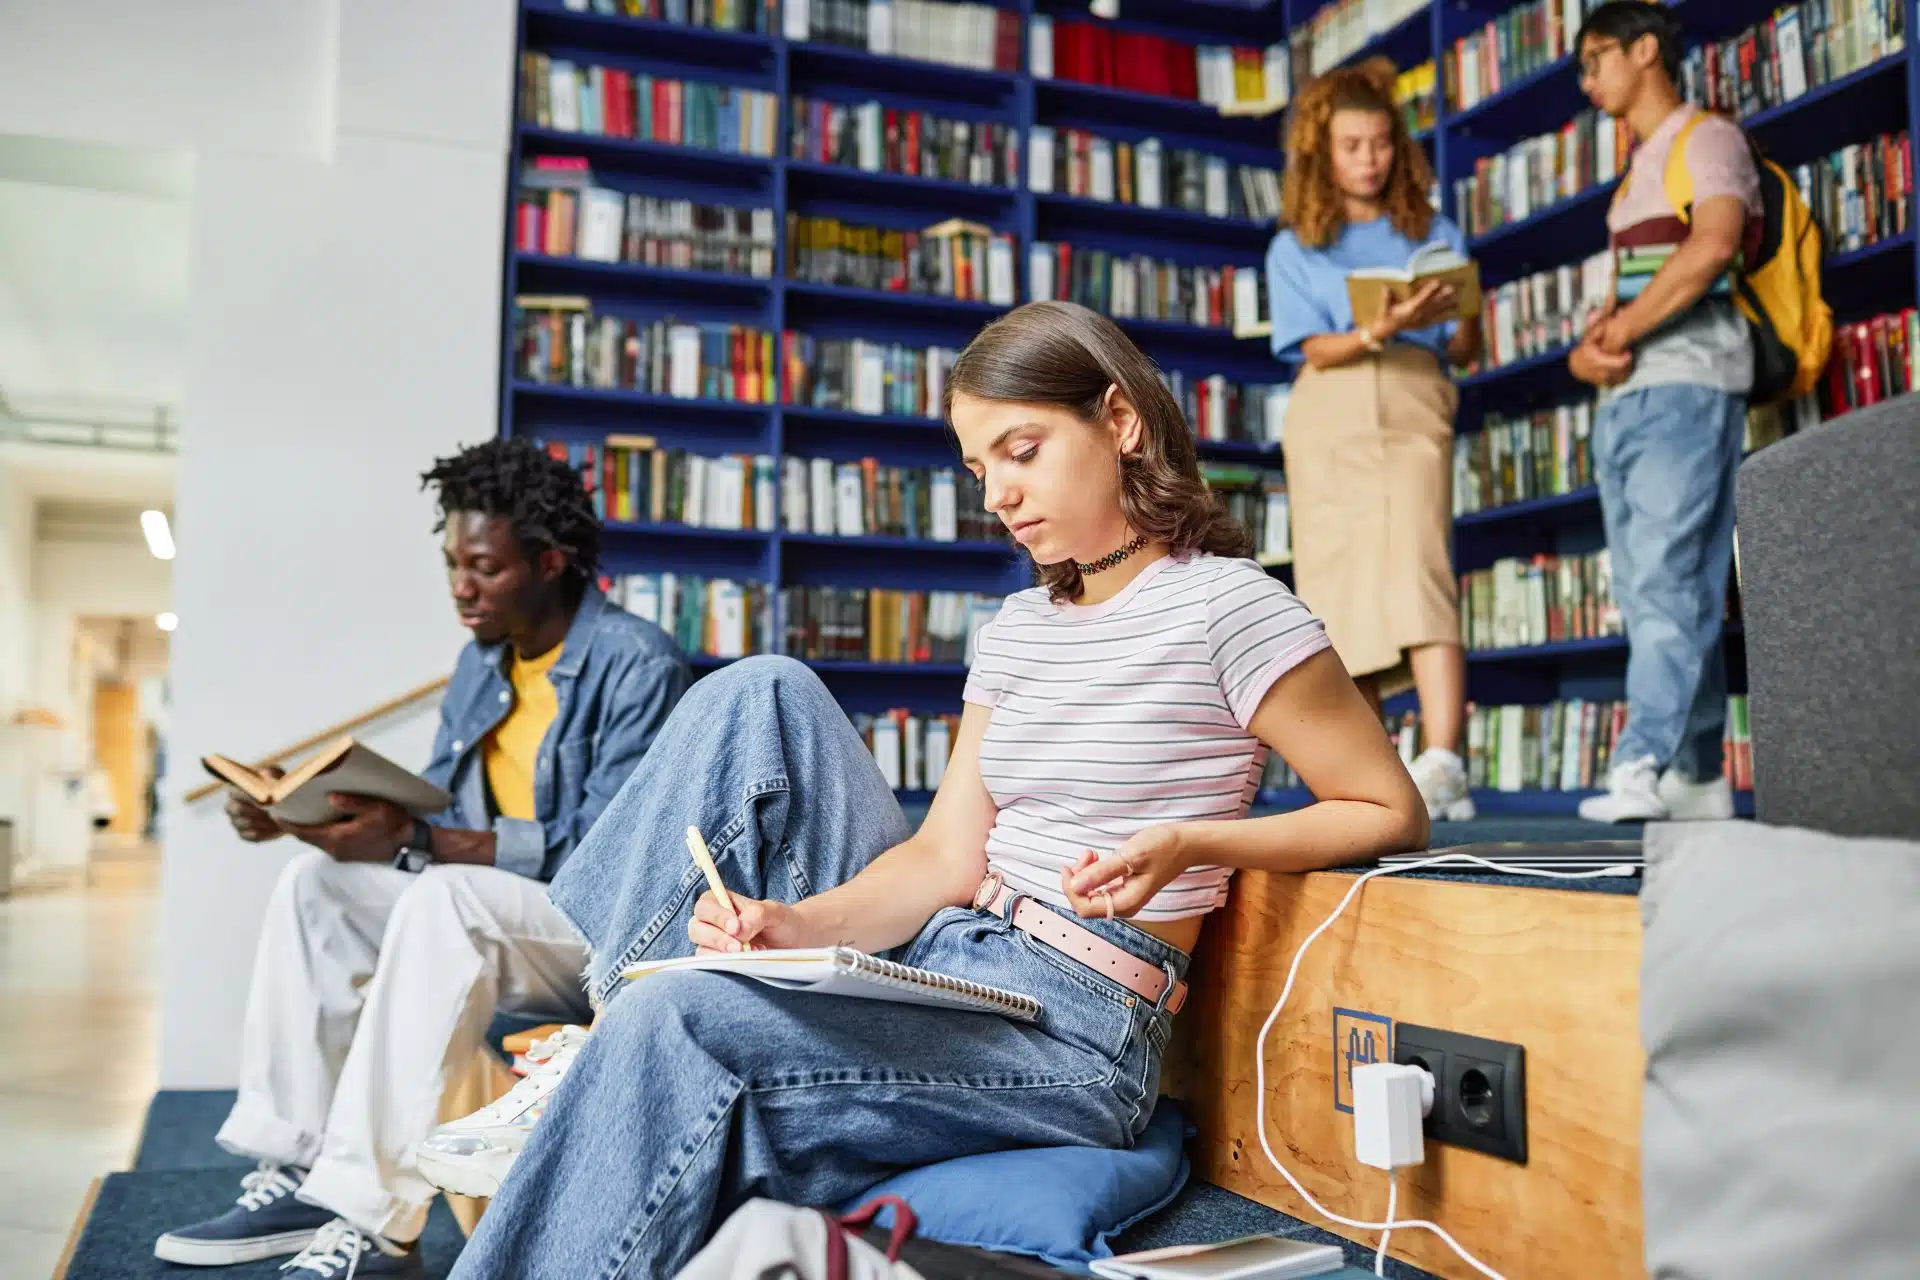 Vibrant side view portrait of young woman doing homework in college library with students in background, copy space